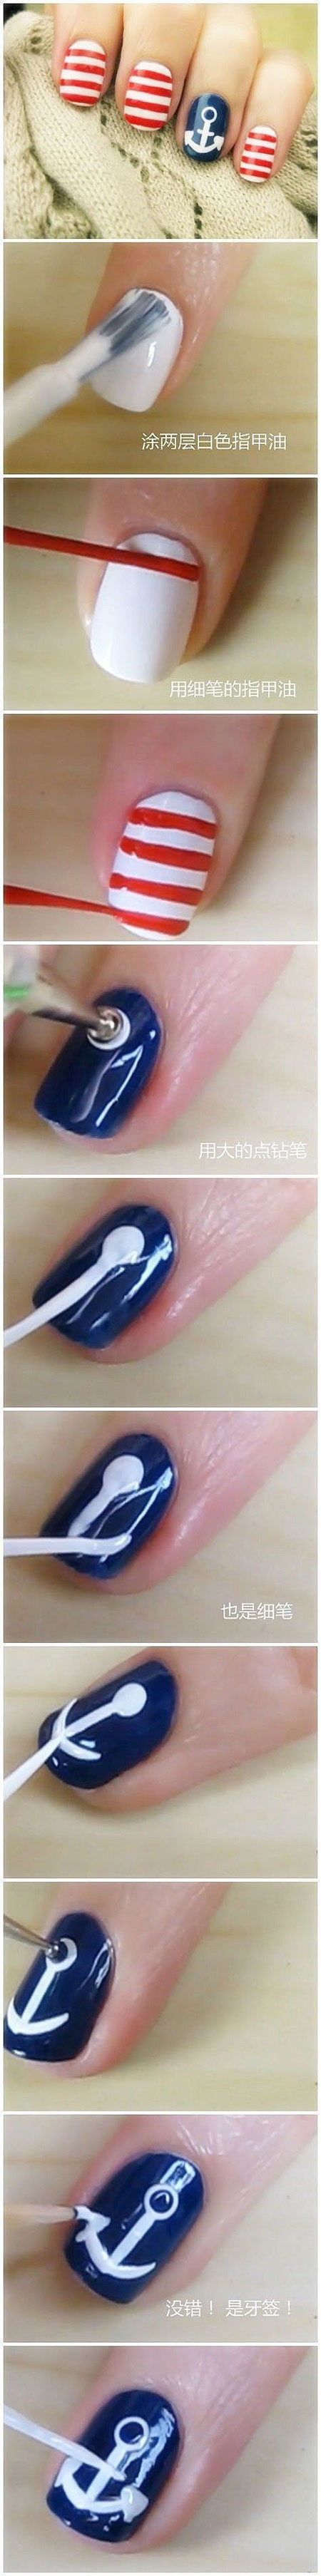 10-Easy-Red-Nail-Art-Tutorials-For-Beginners-Learners-2014-9